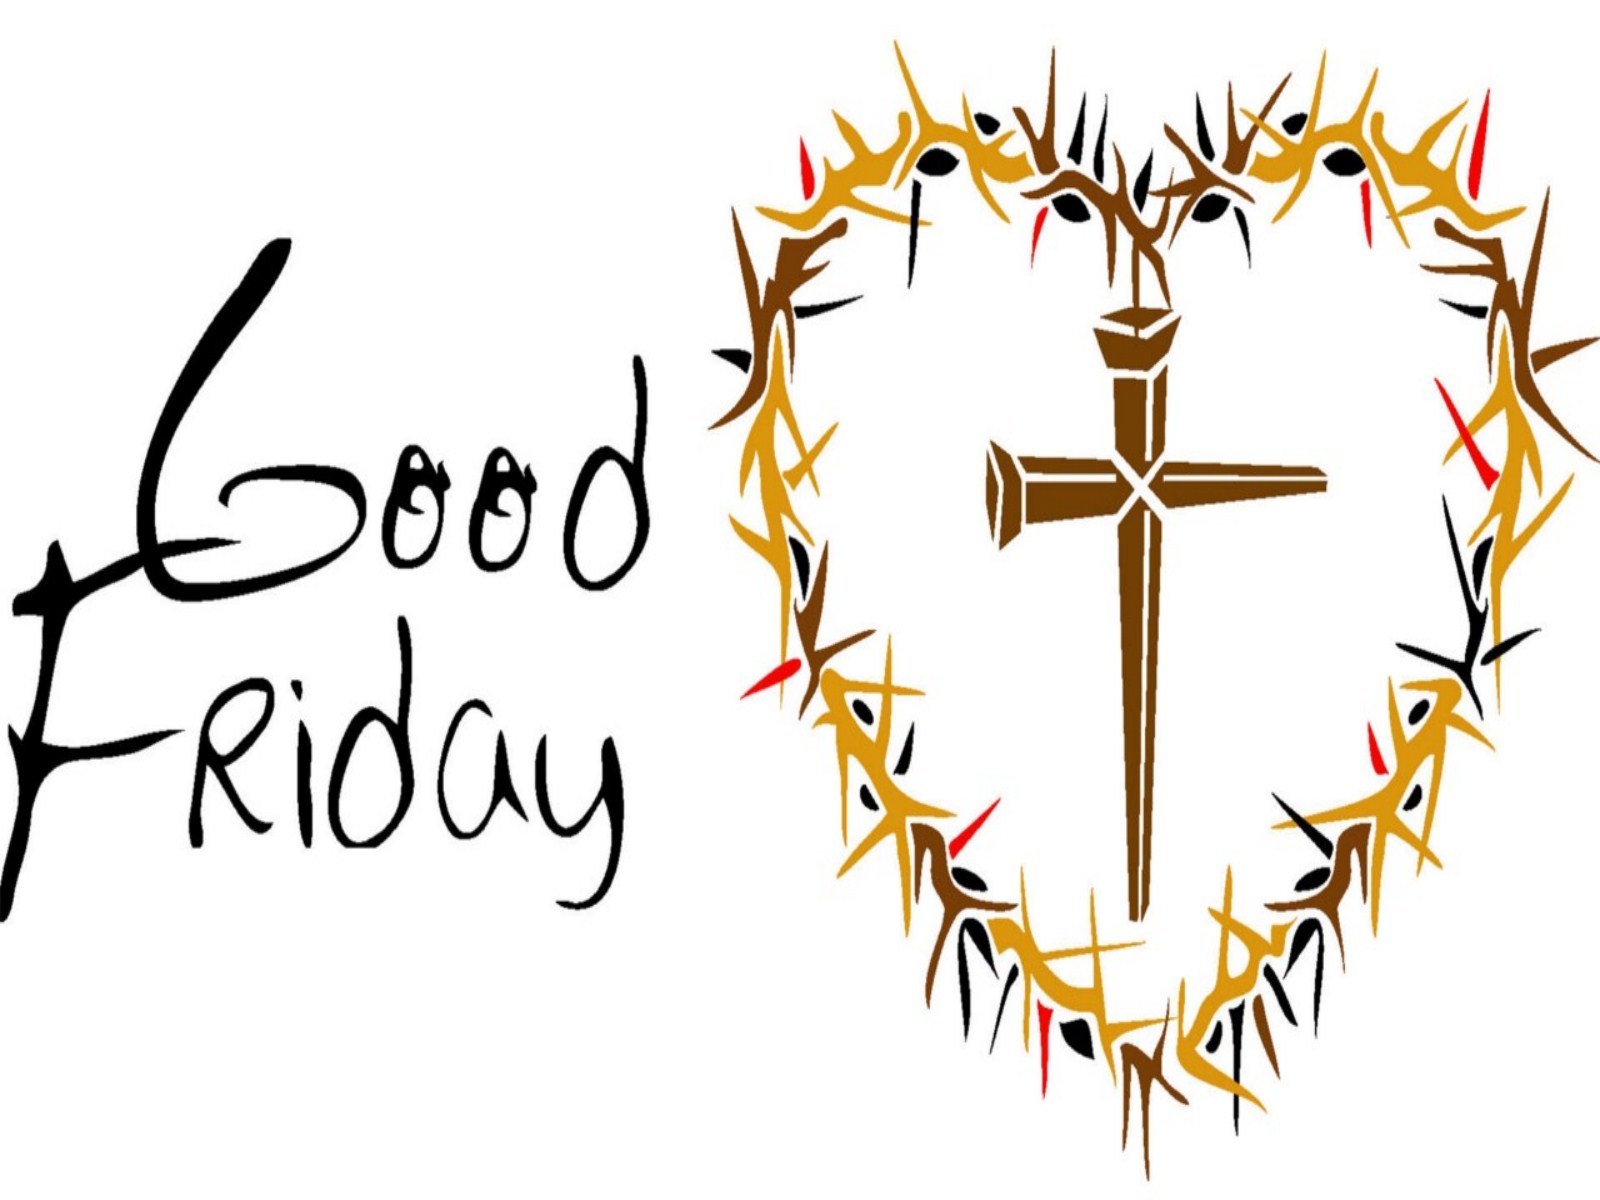 Very beautiful good friday cl